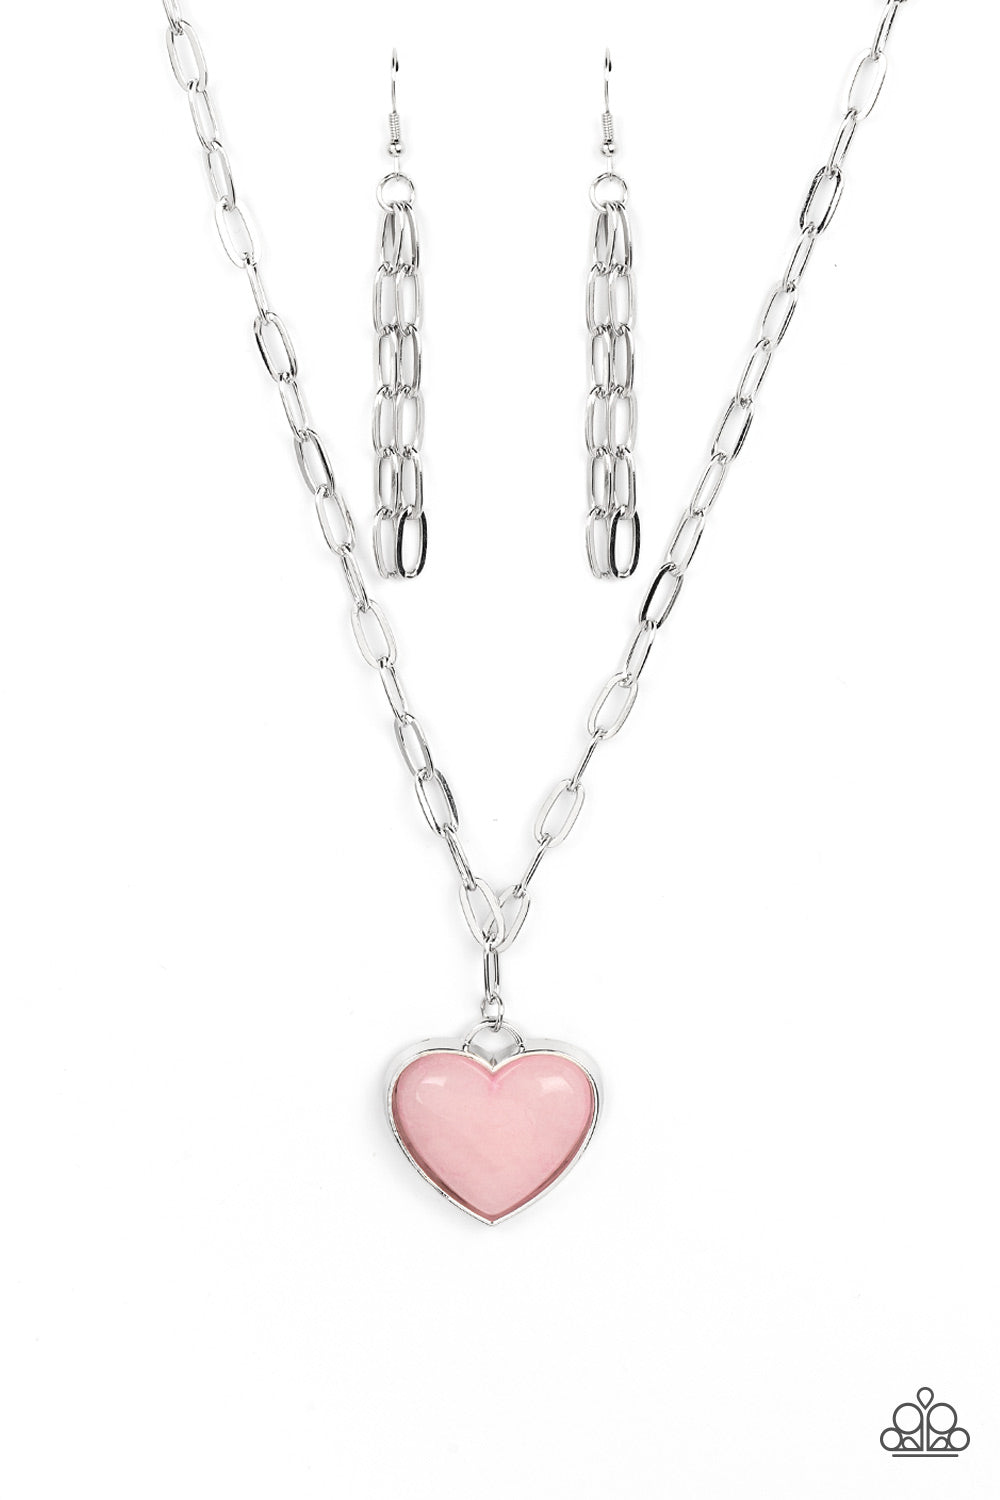 Everlasting Endearment Necklace ( Pink, Copper, White)